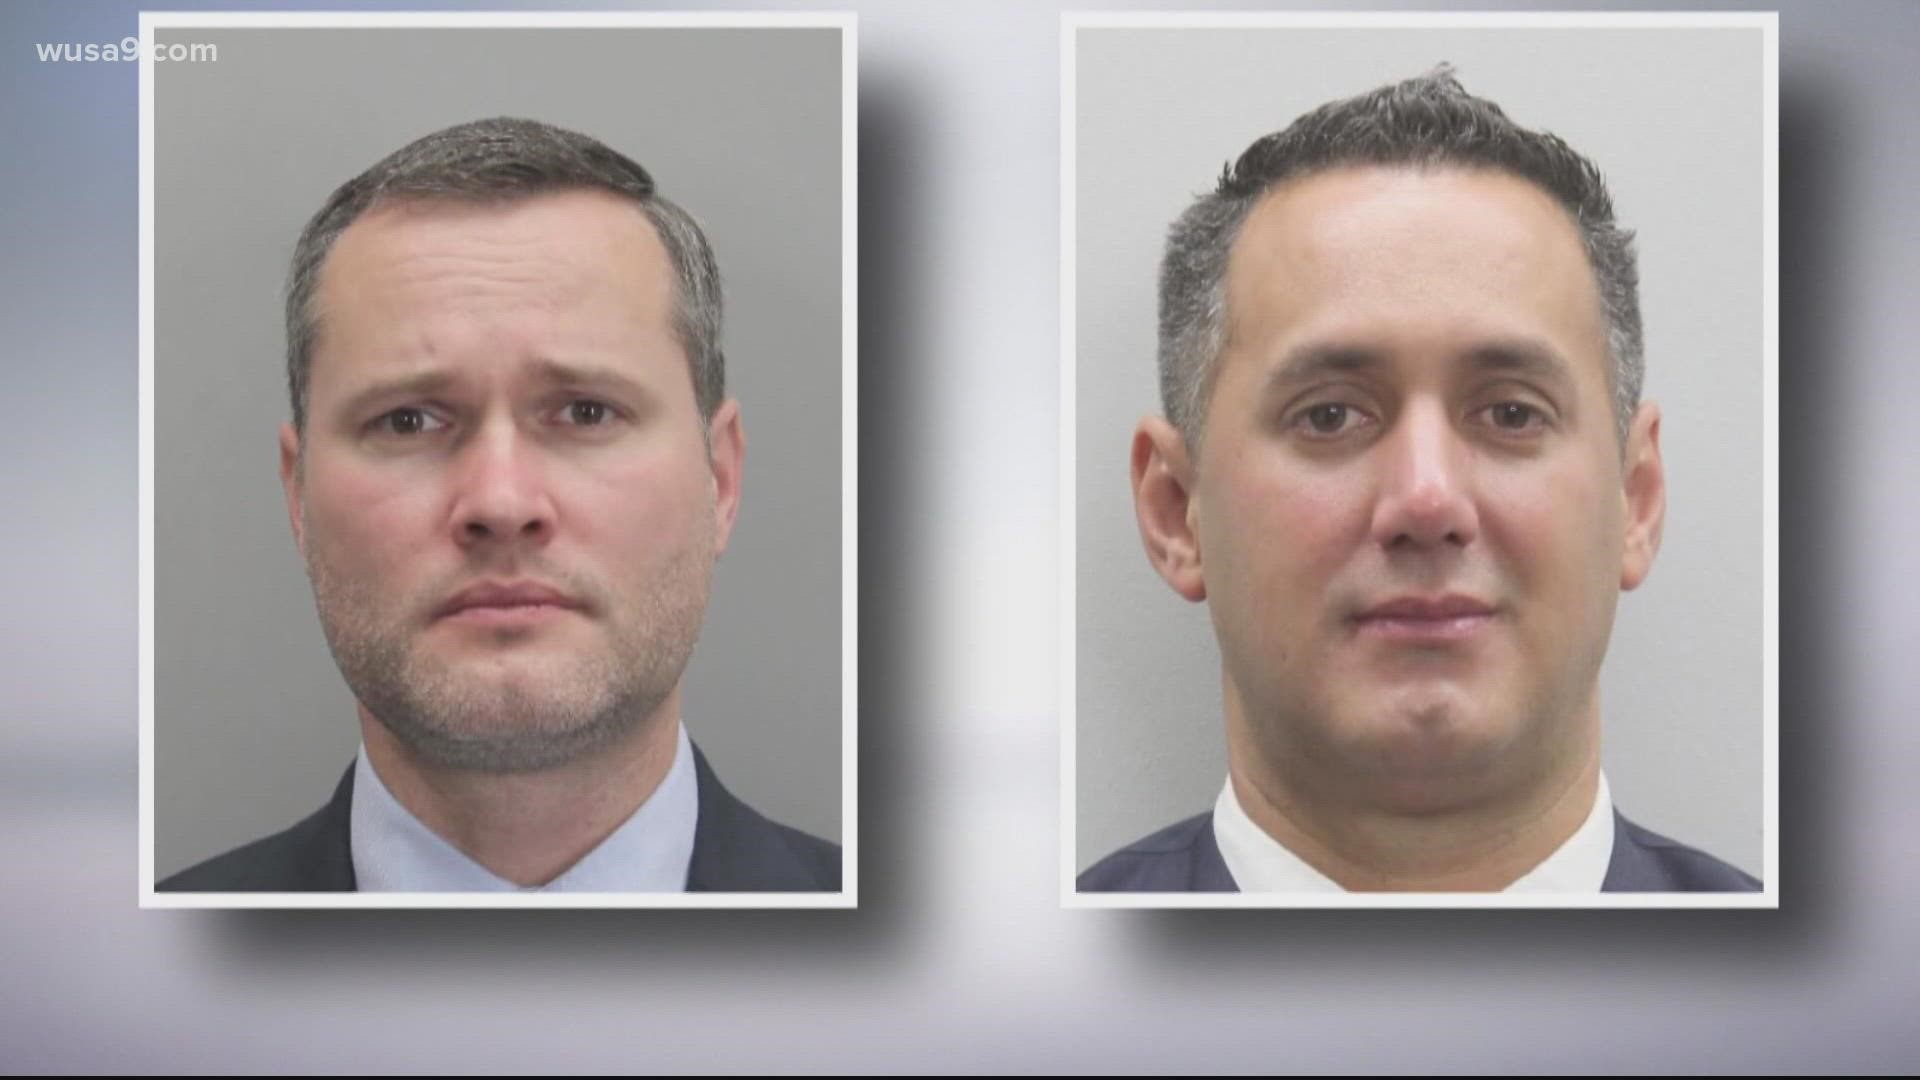 Officers Alejandro Amaya and Lucas Vinyard will be fired by the Interior Department, according to the Fraternal Order of Police, after being cleared by a judge.